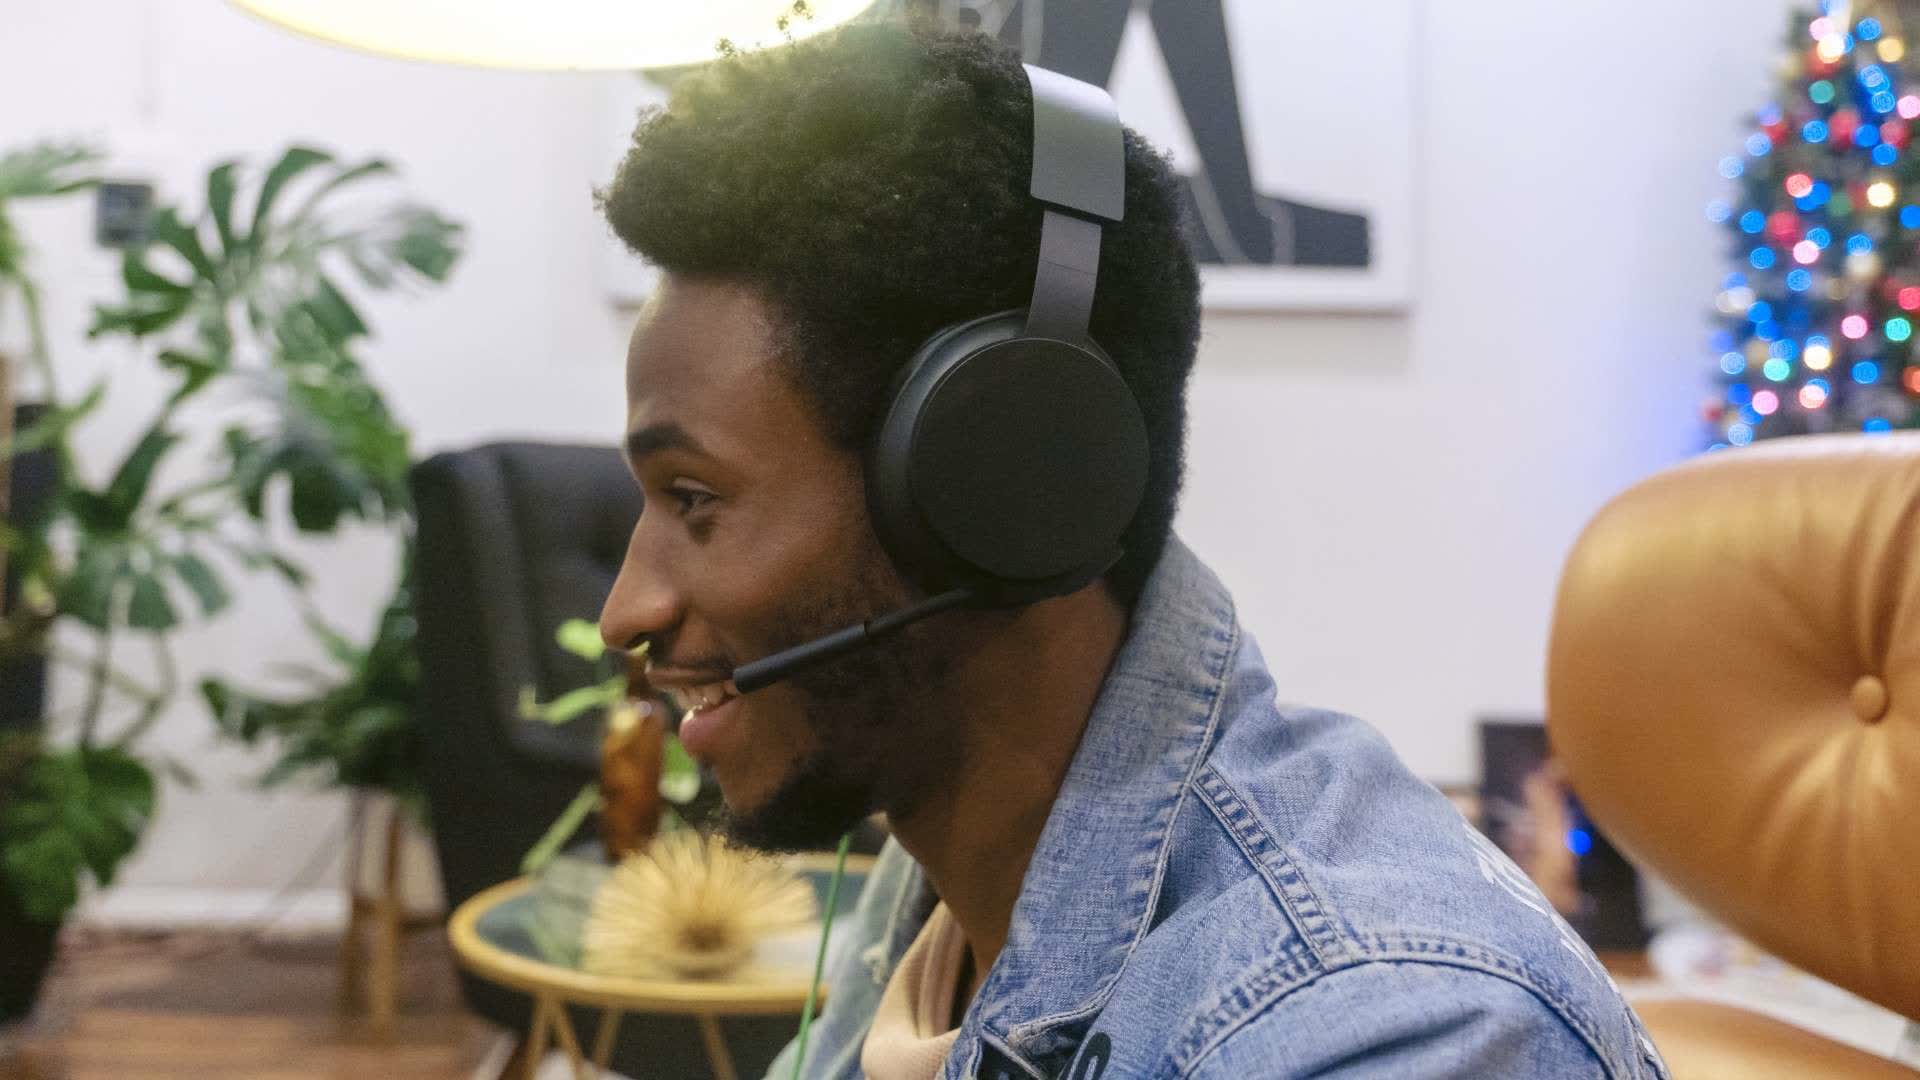 Microsoft launches a new wired Xbox stereo headset